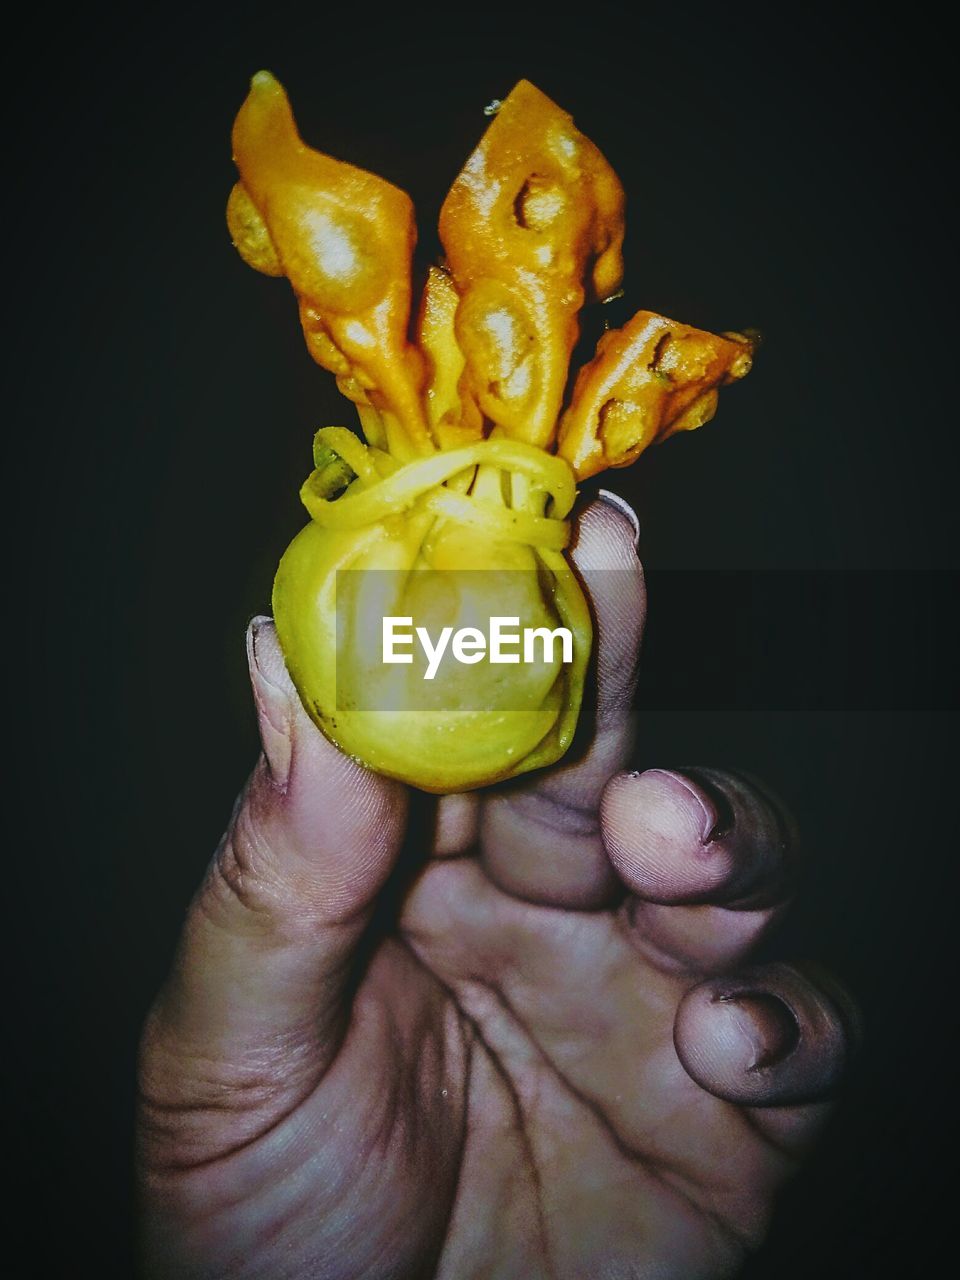 CLOSE-UP OF HUMAN HAND HOLDING FRUIT